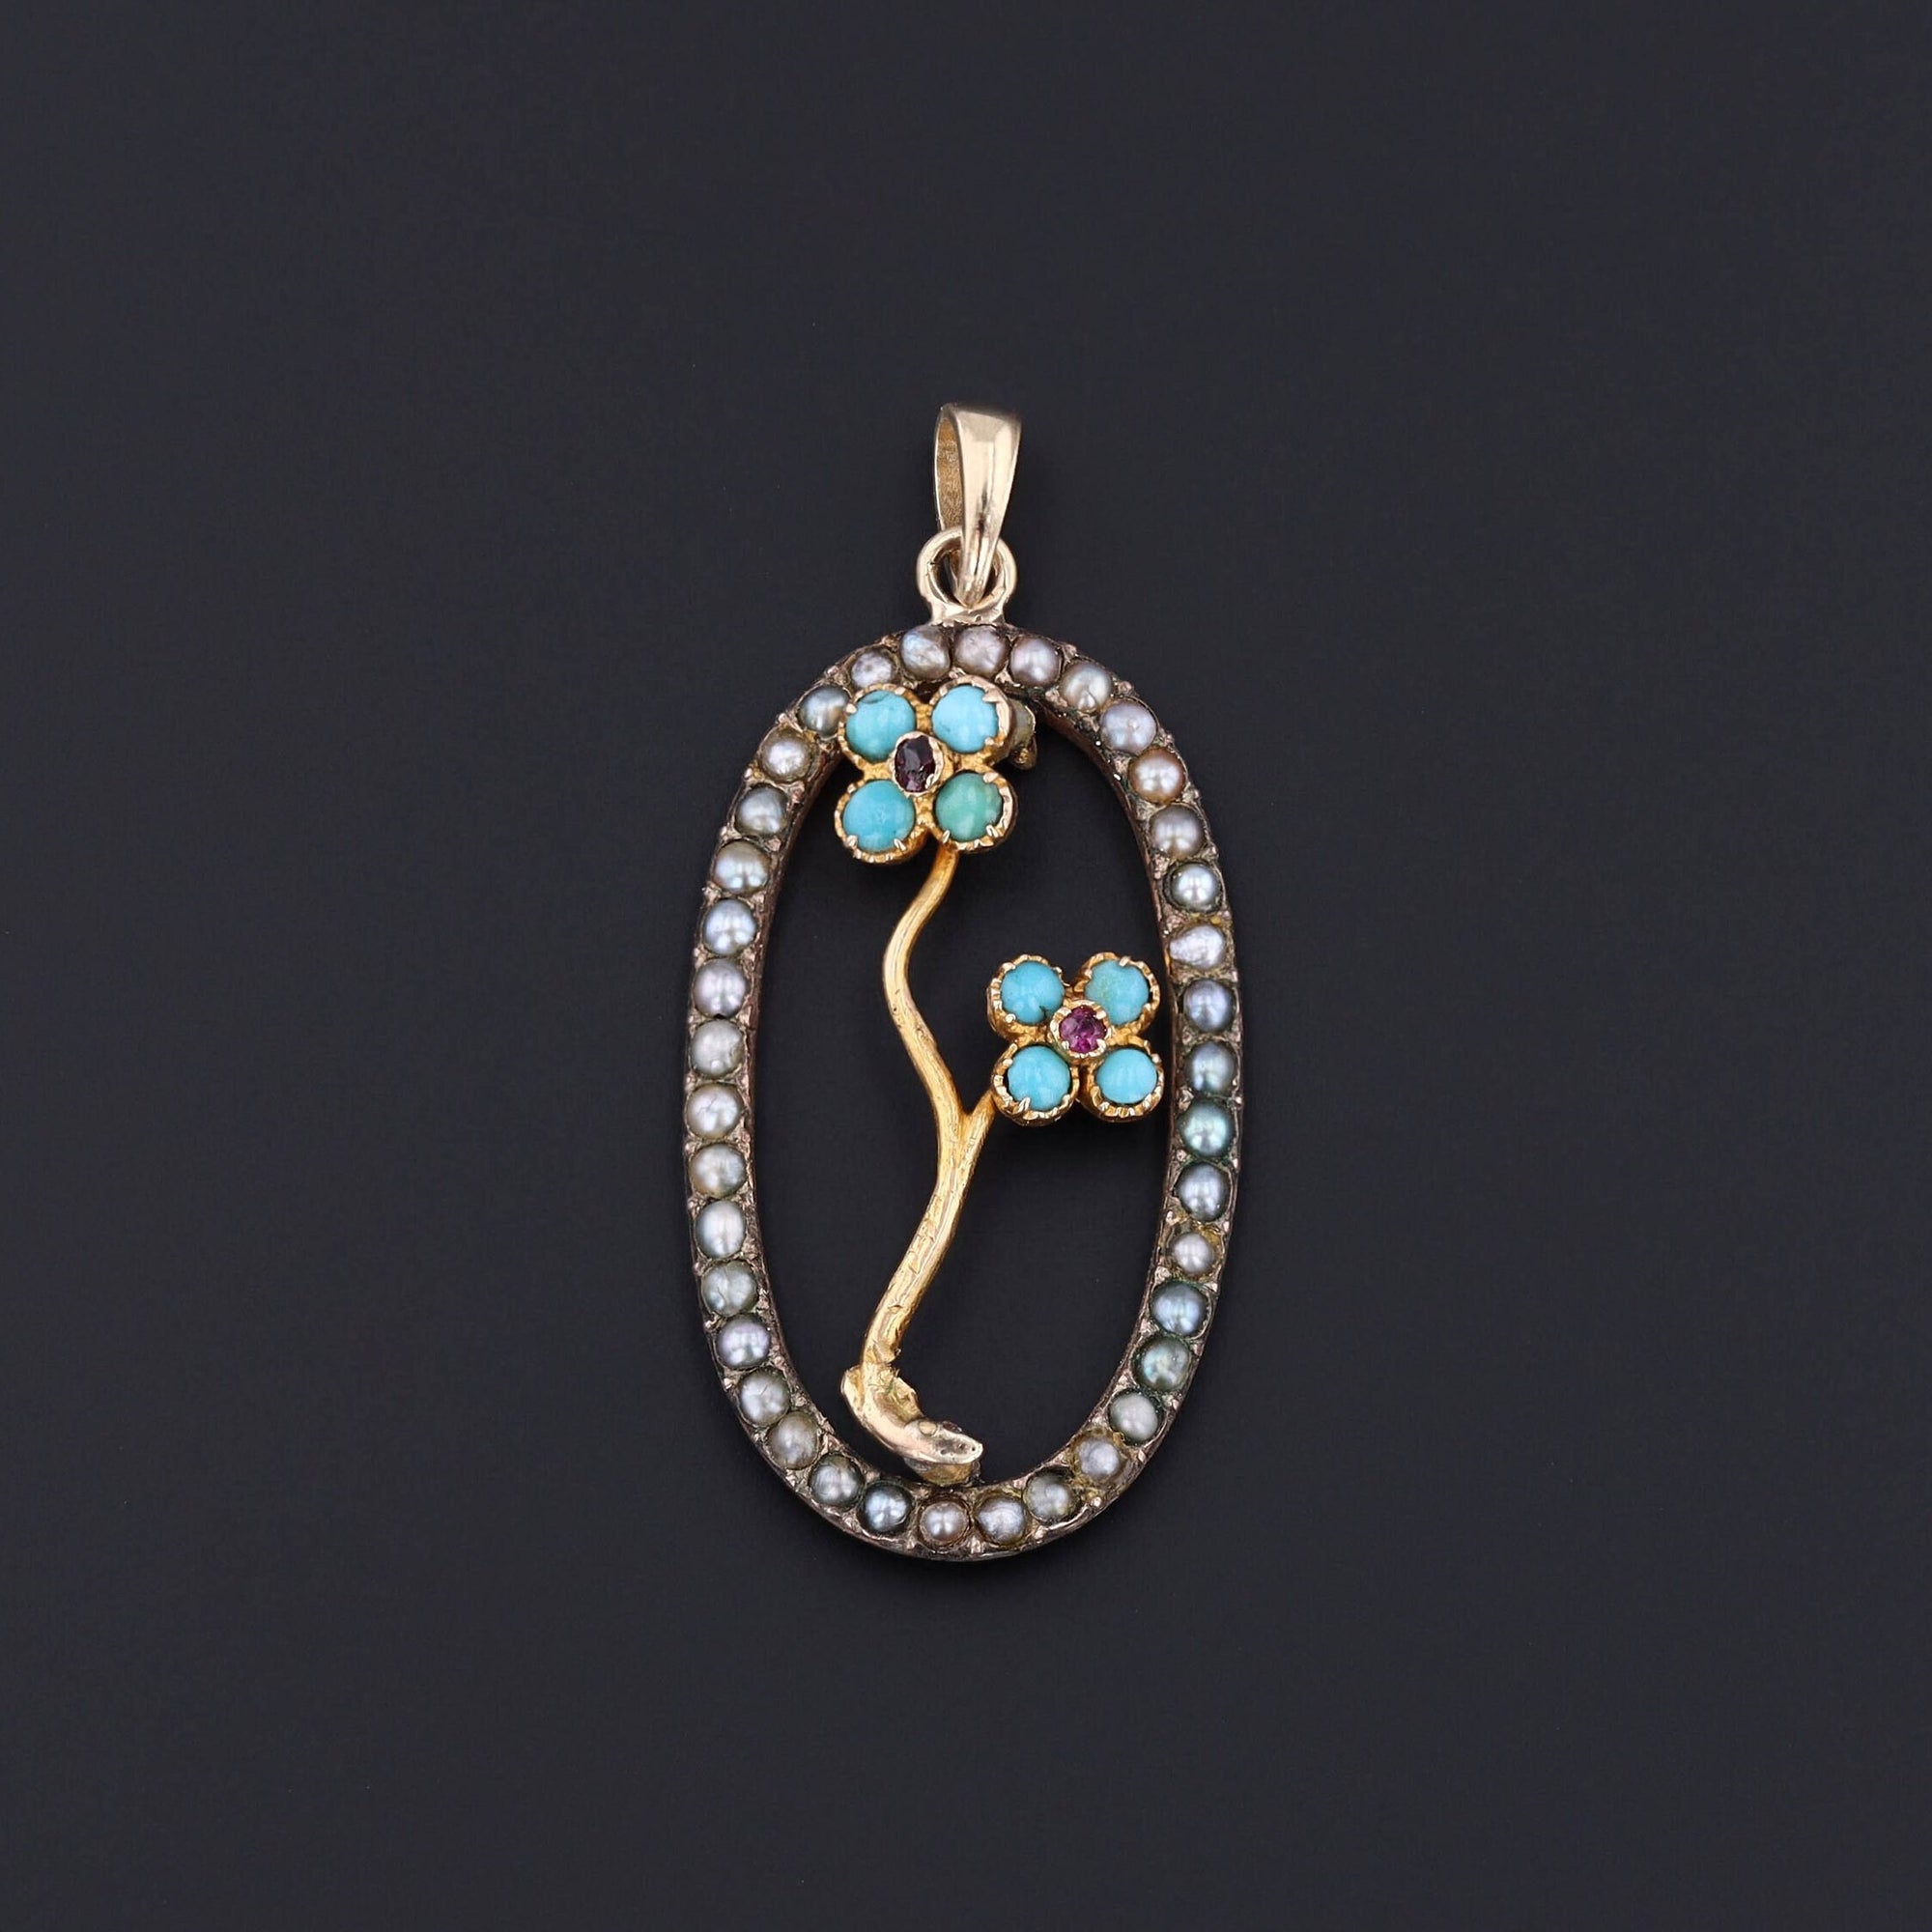 Antique Turquoise Forget-Me-Not Conversion Pendant of 14k Gold